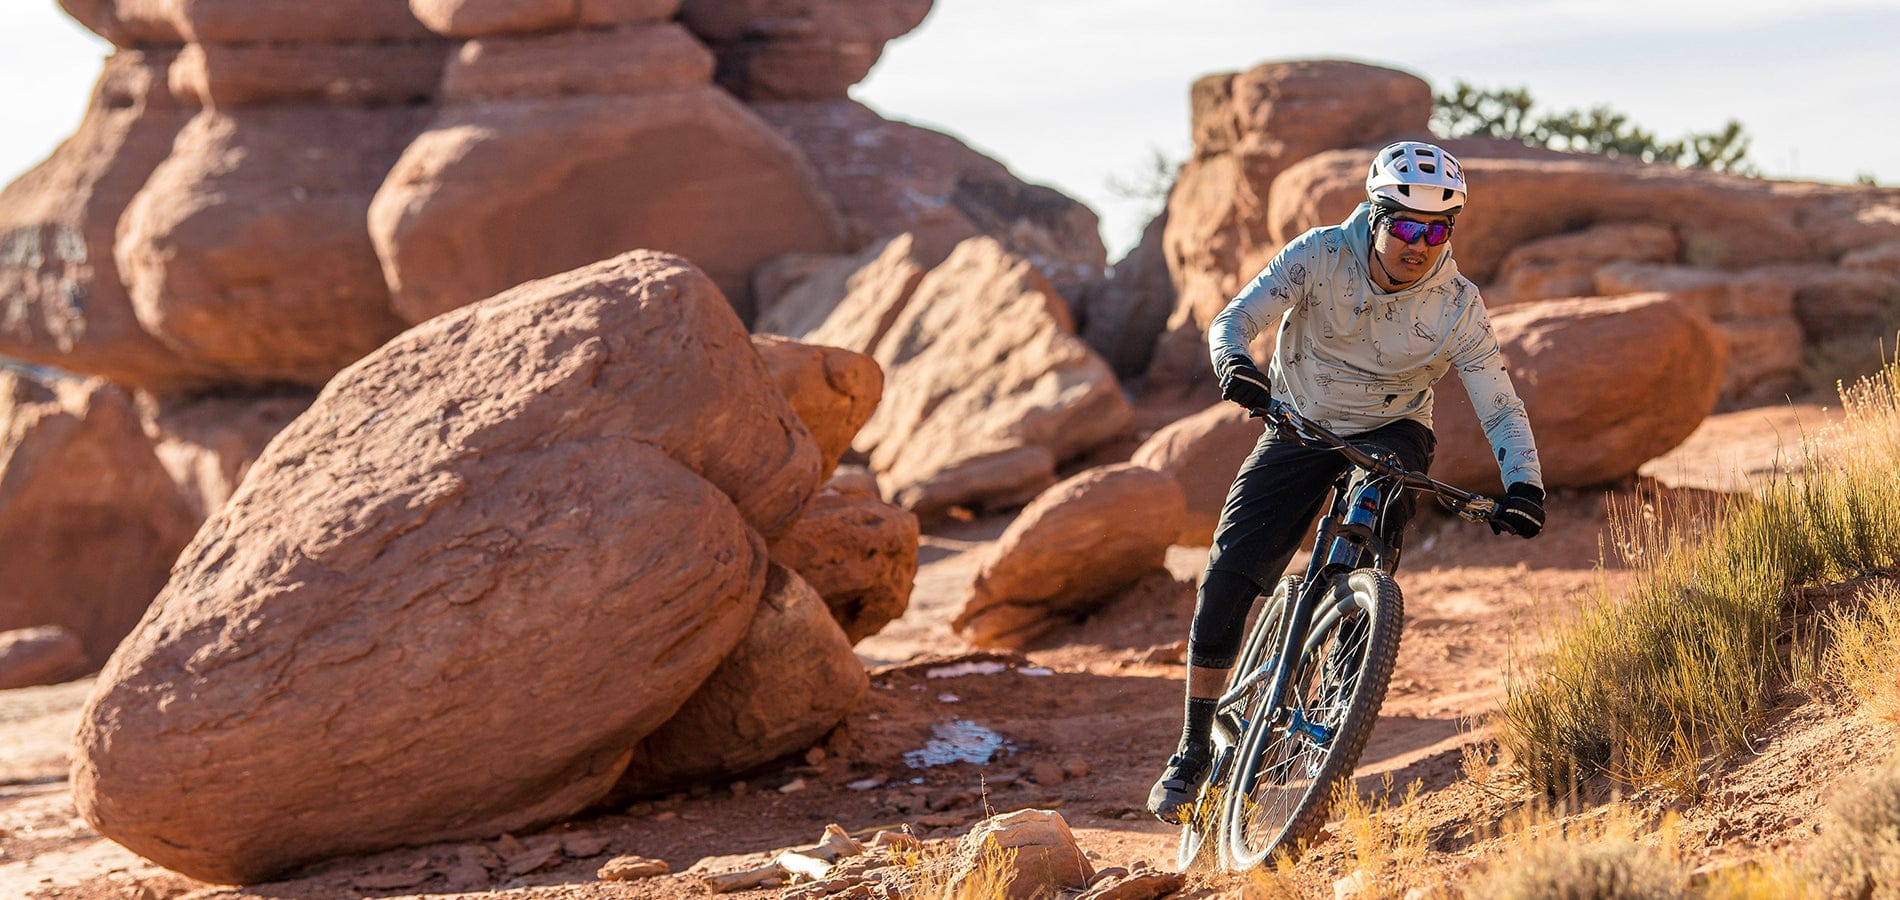 Man riding bike with helmet and on. Riding next to red rocks in a desert setting